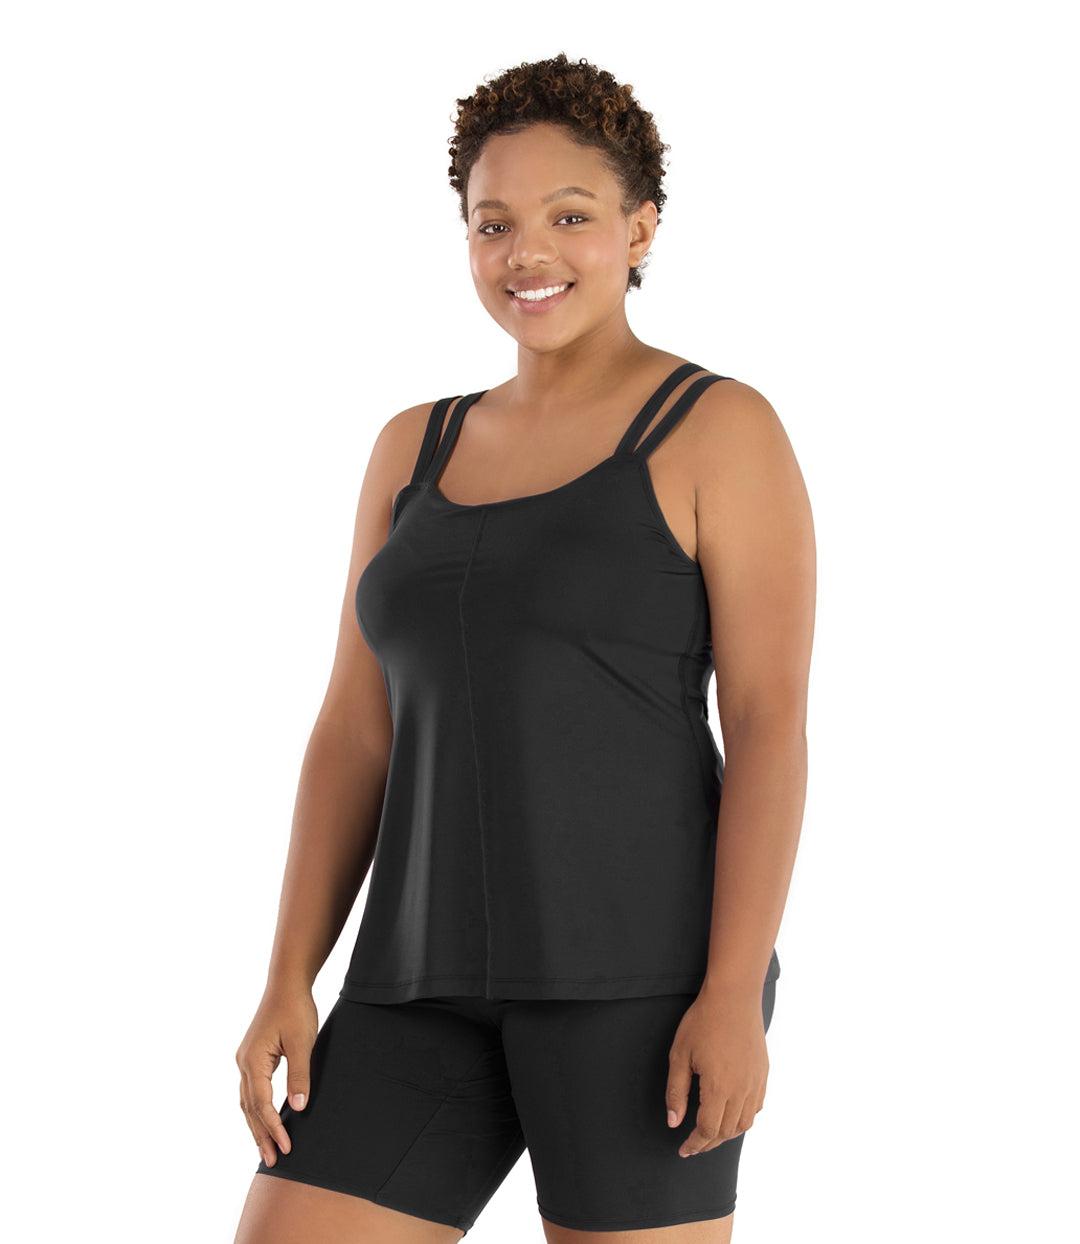 Plus size woman, facing front, wearing JunoActive plus size Junowear Hush Strappy Cami with Bra in Black. The woman is wearing a pair of Black Junowear Hush Boxer briefs.